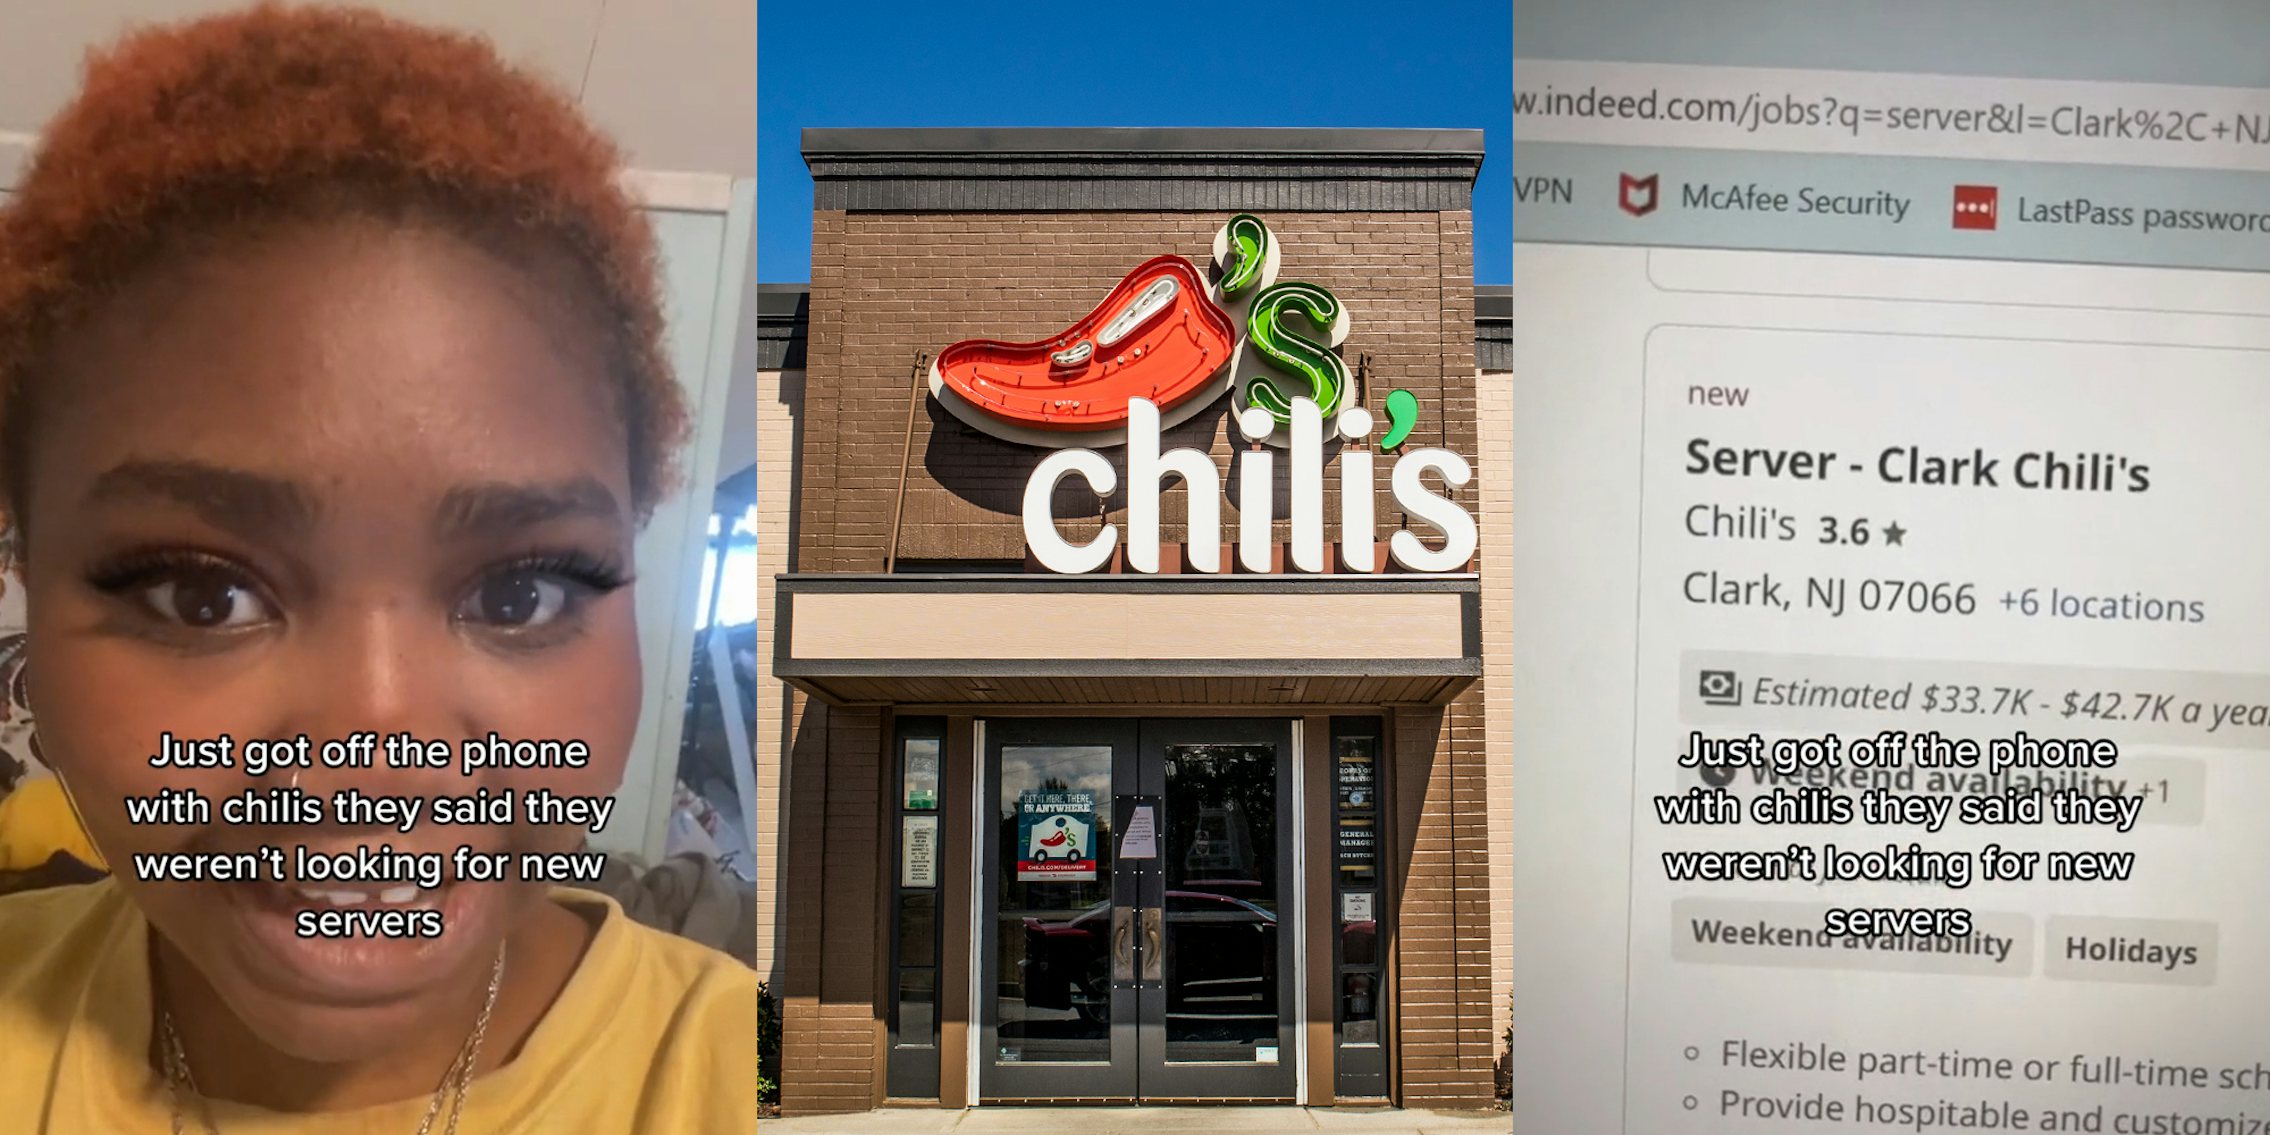 woman with caption 'Just got off the phone with chilis they said they weren't looking for new servers' (l) Chili's restaurant front with sign (c) computer screen with indeed job search showing 'Server - Clark Chili's' with caption 'Just got off the phone with chilis they said they weren't looking for new servers' (r)